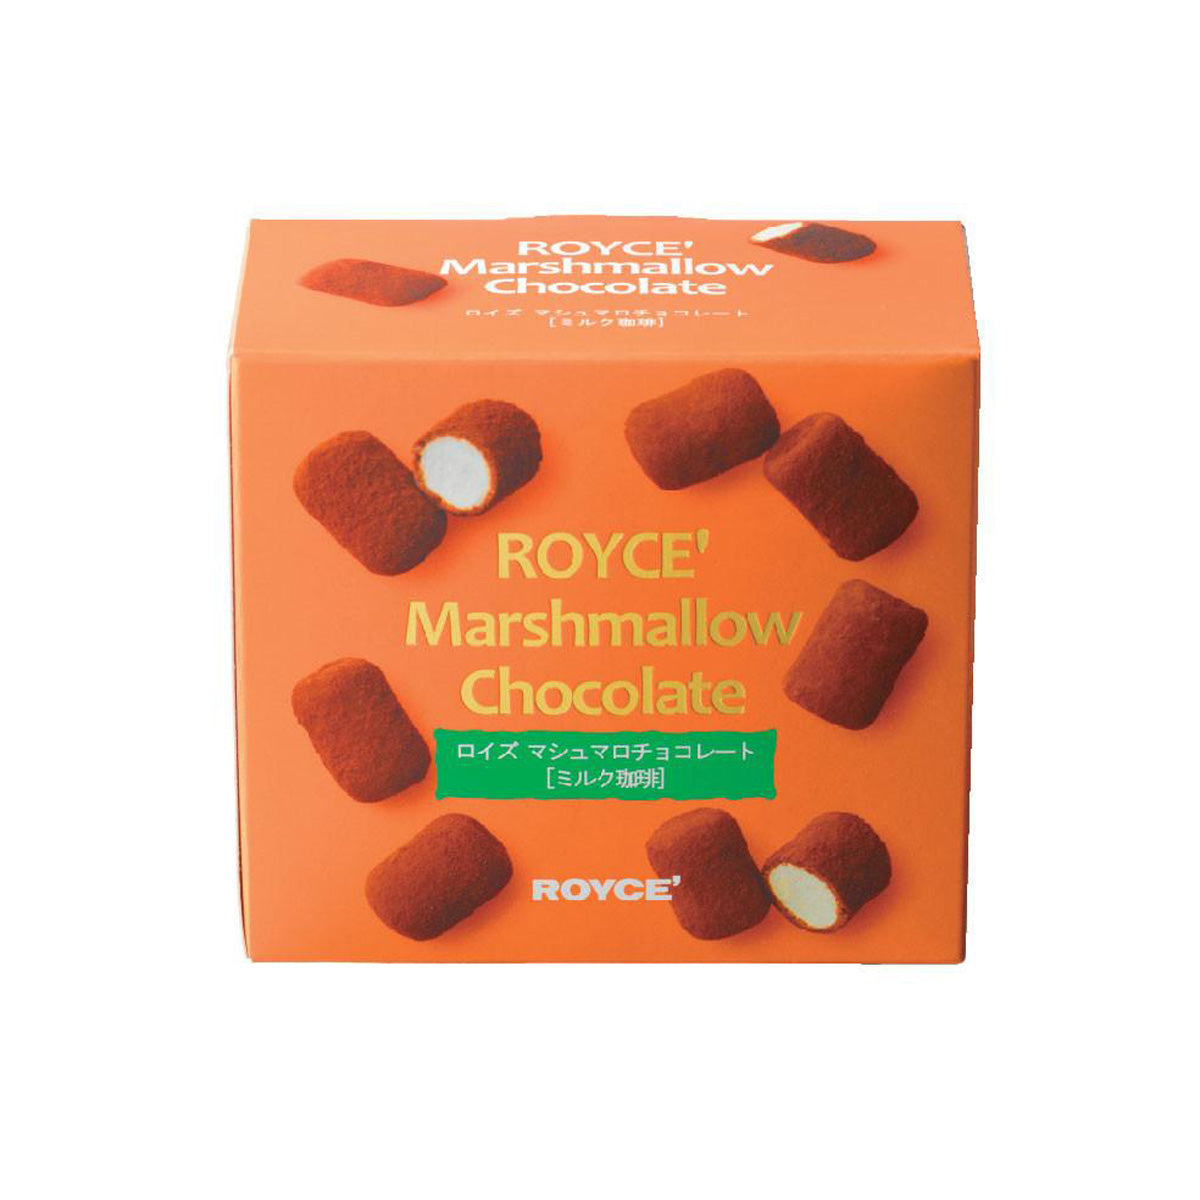 ROYCE' Chocolate - Marshmallow Chocolate "Milk Coffee" - Image shows an orange box with pictures of brown chocolate-coated white marshmallows. Top and center texts say ROYCE' Marshmallow Chocolate. Text on bottom says ROYCE'.